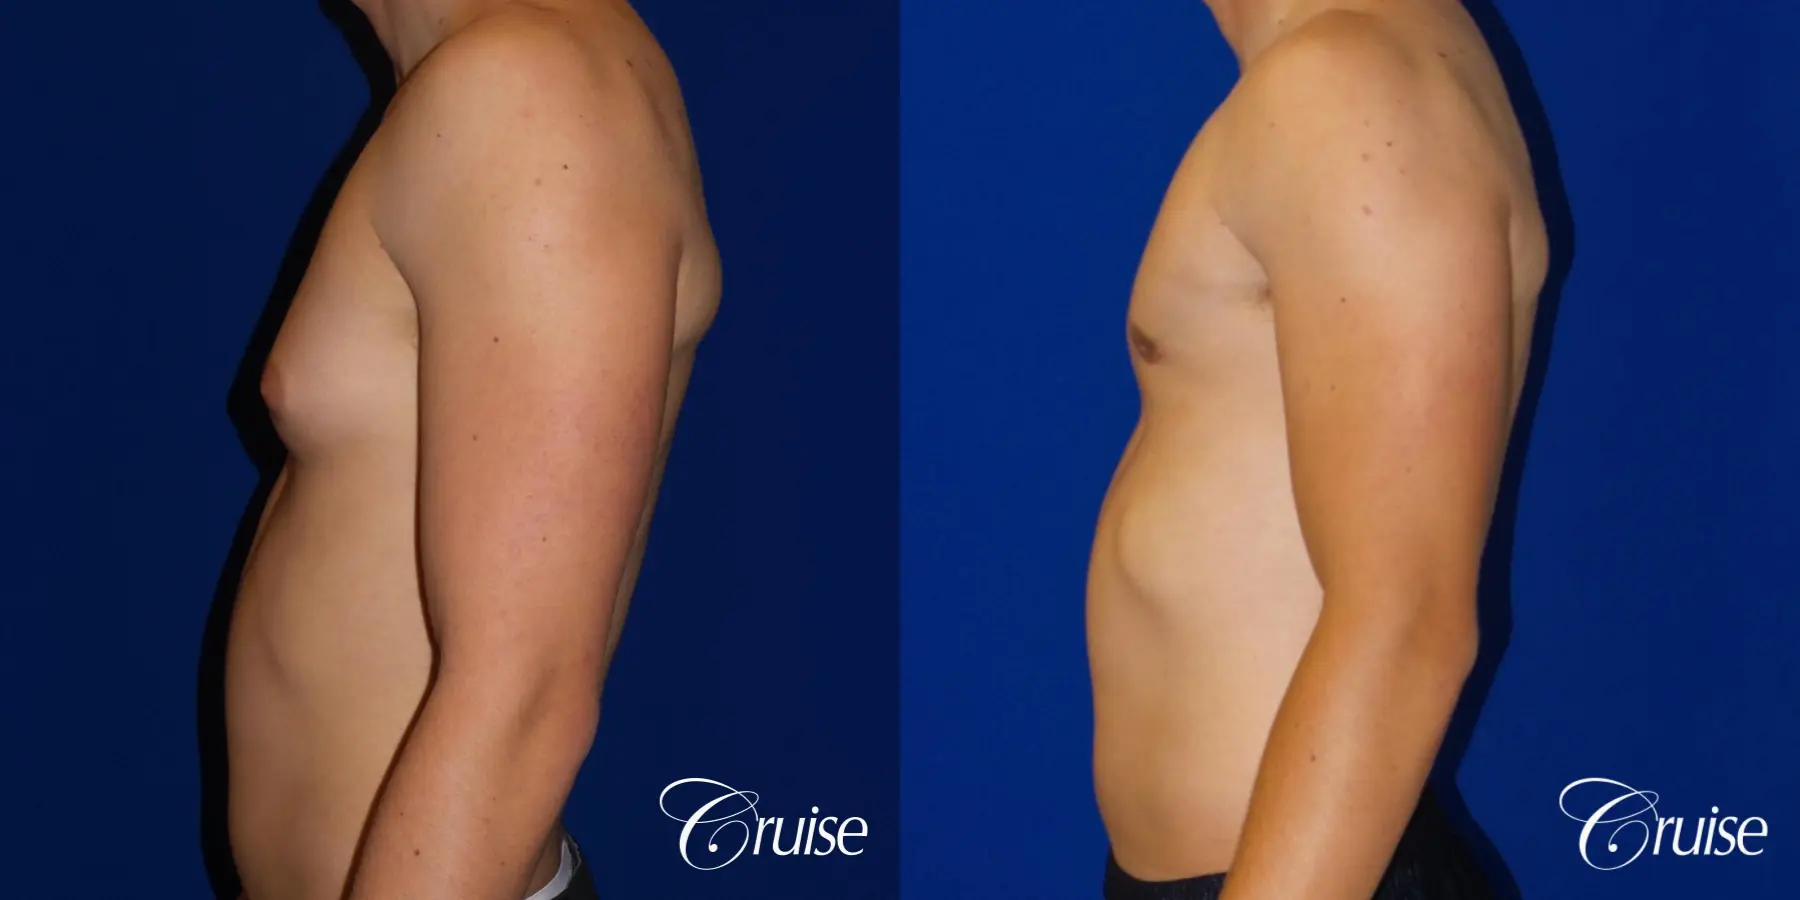 Best moderate gynecomastia on male adult - Before and After 2